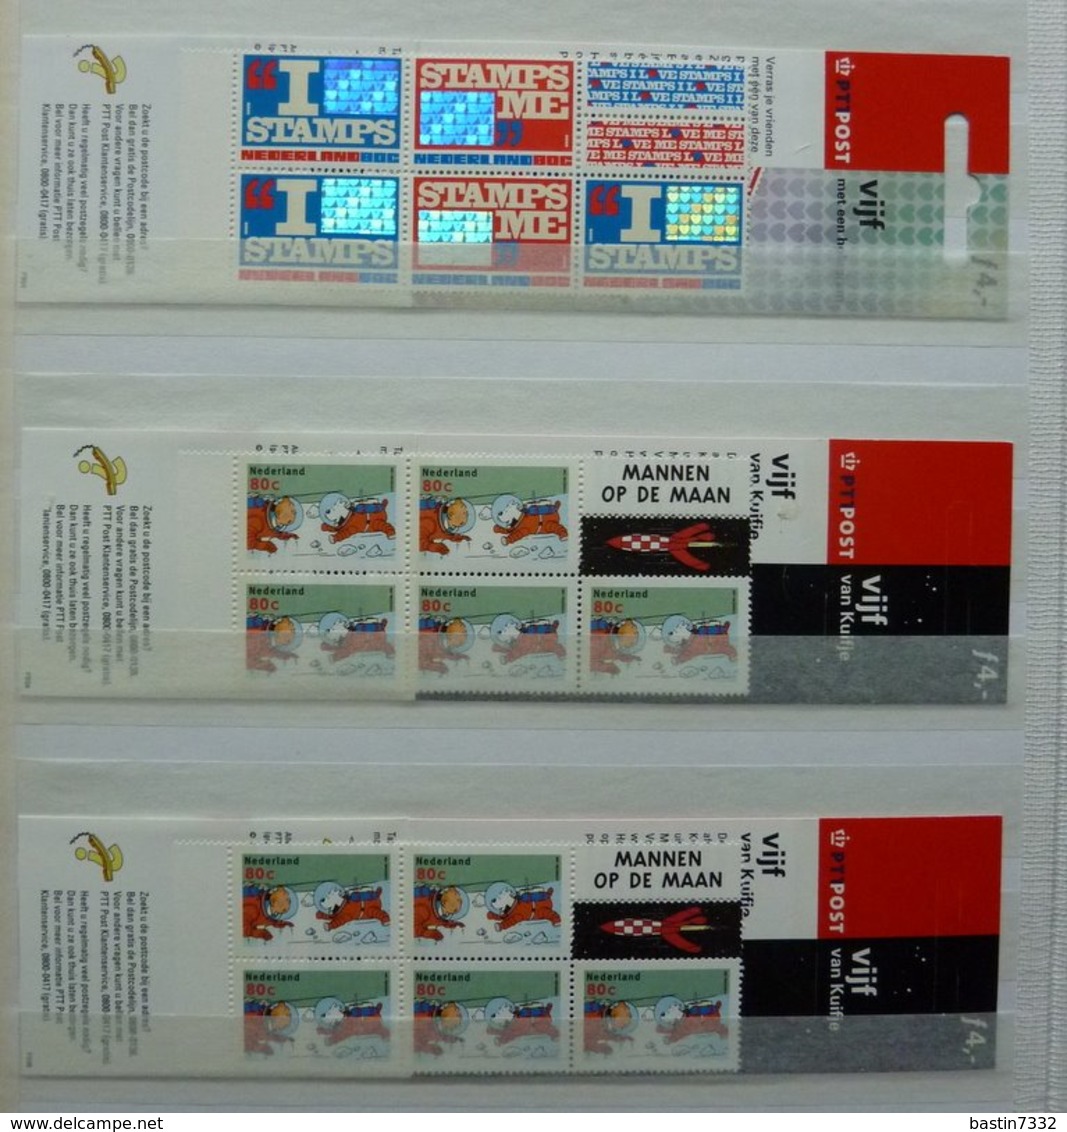 Netherlands/Pays Bas/Holanda collection in 3 stockbooks with booklets/MSheets MNH/Postfris/Neuf sans charniere